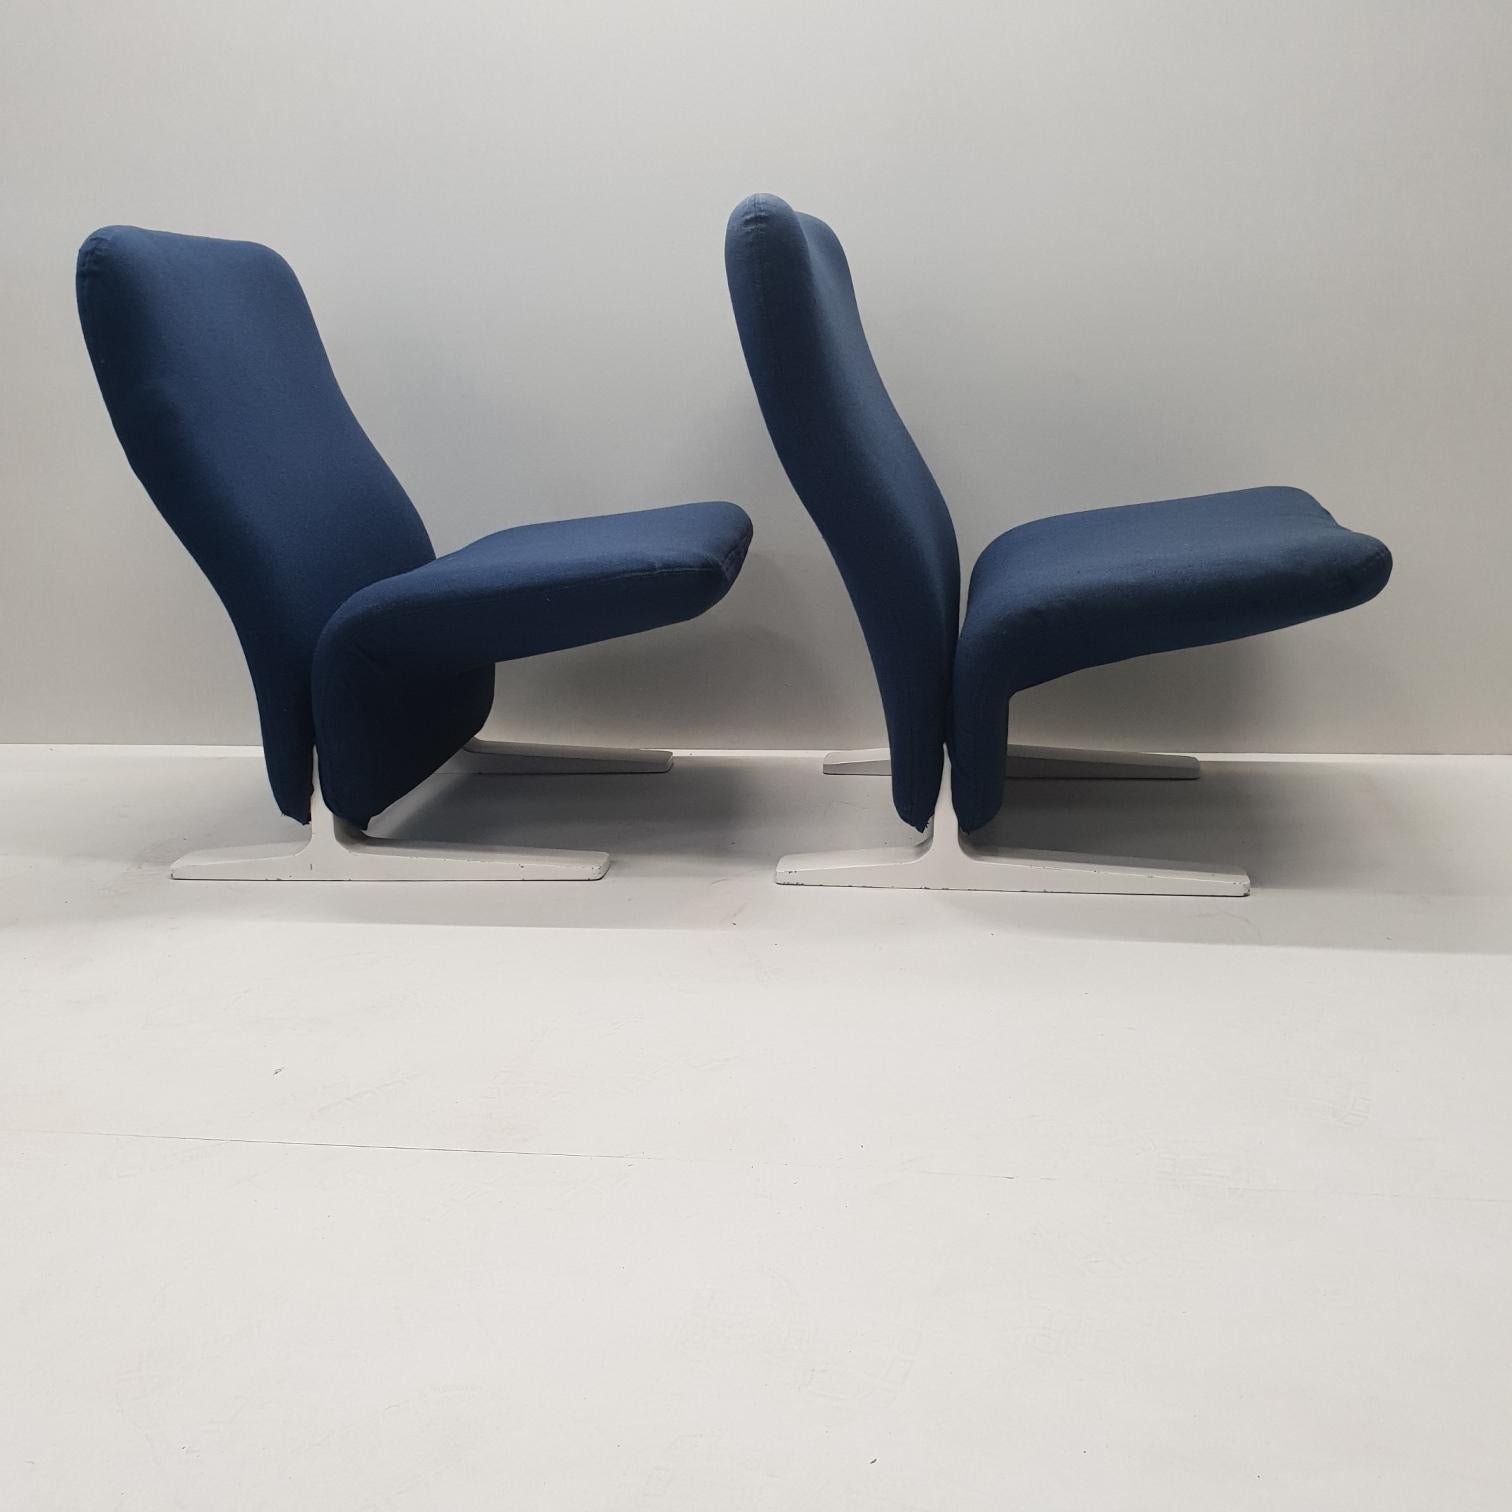 20th Century Pair of Lounge Chairs 'Concorde F780' by Pierre Paulin for Artifort, 1960s